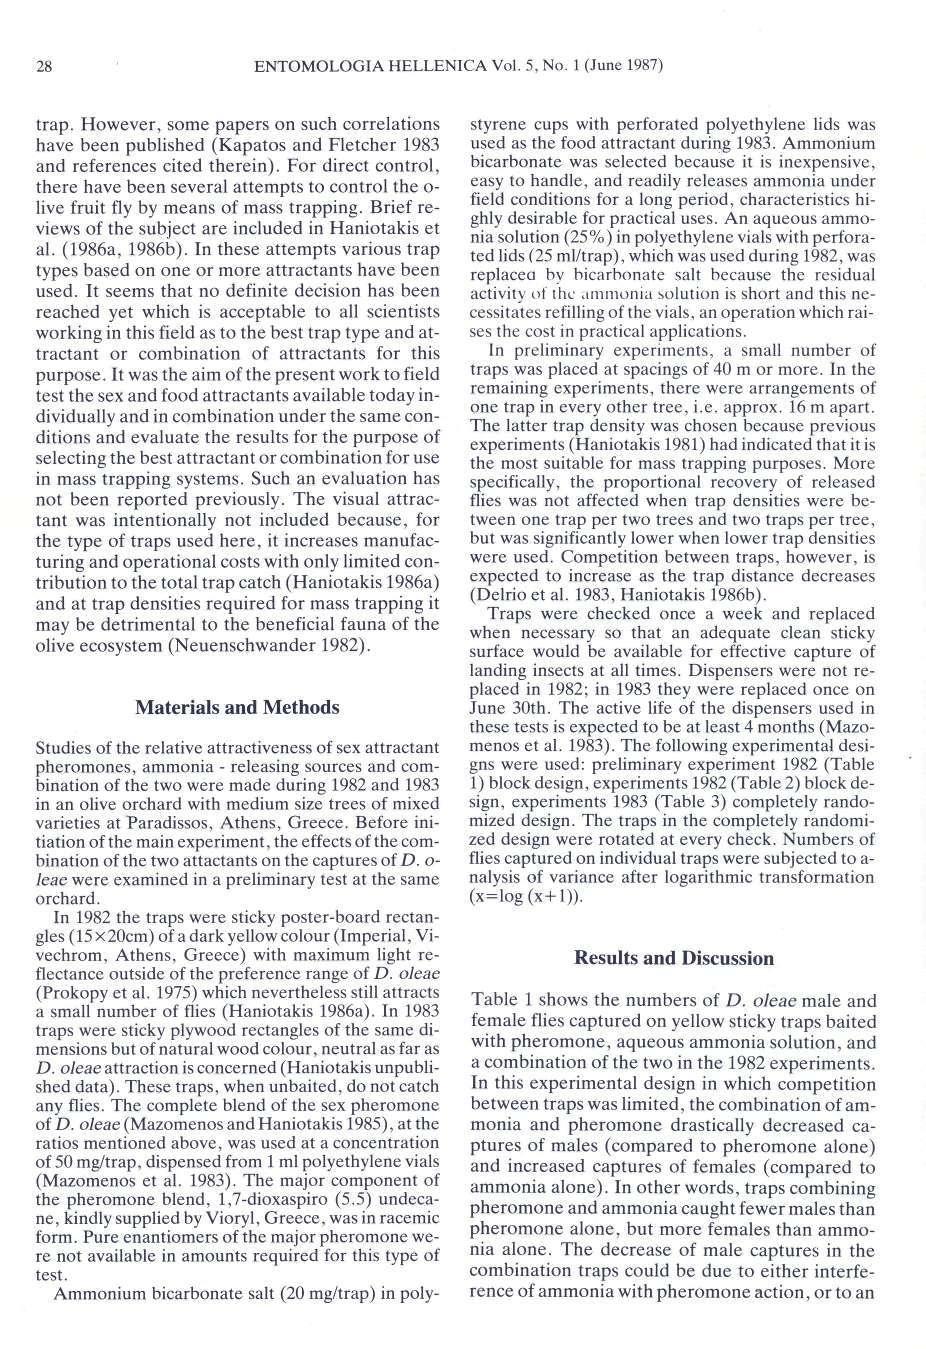 8 ENTOMOLOGI HELLENIC Vol. 5. No. (June 987) trp. However, some ppers on such correltions hve been published (Kptos nd Fletcher 983 nd references cited therein).